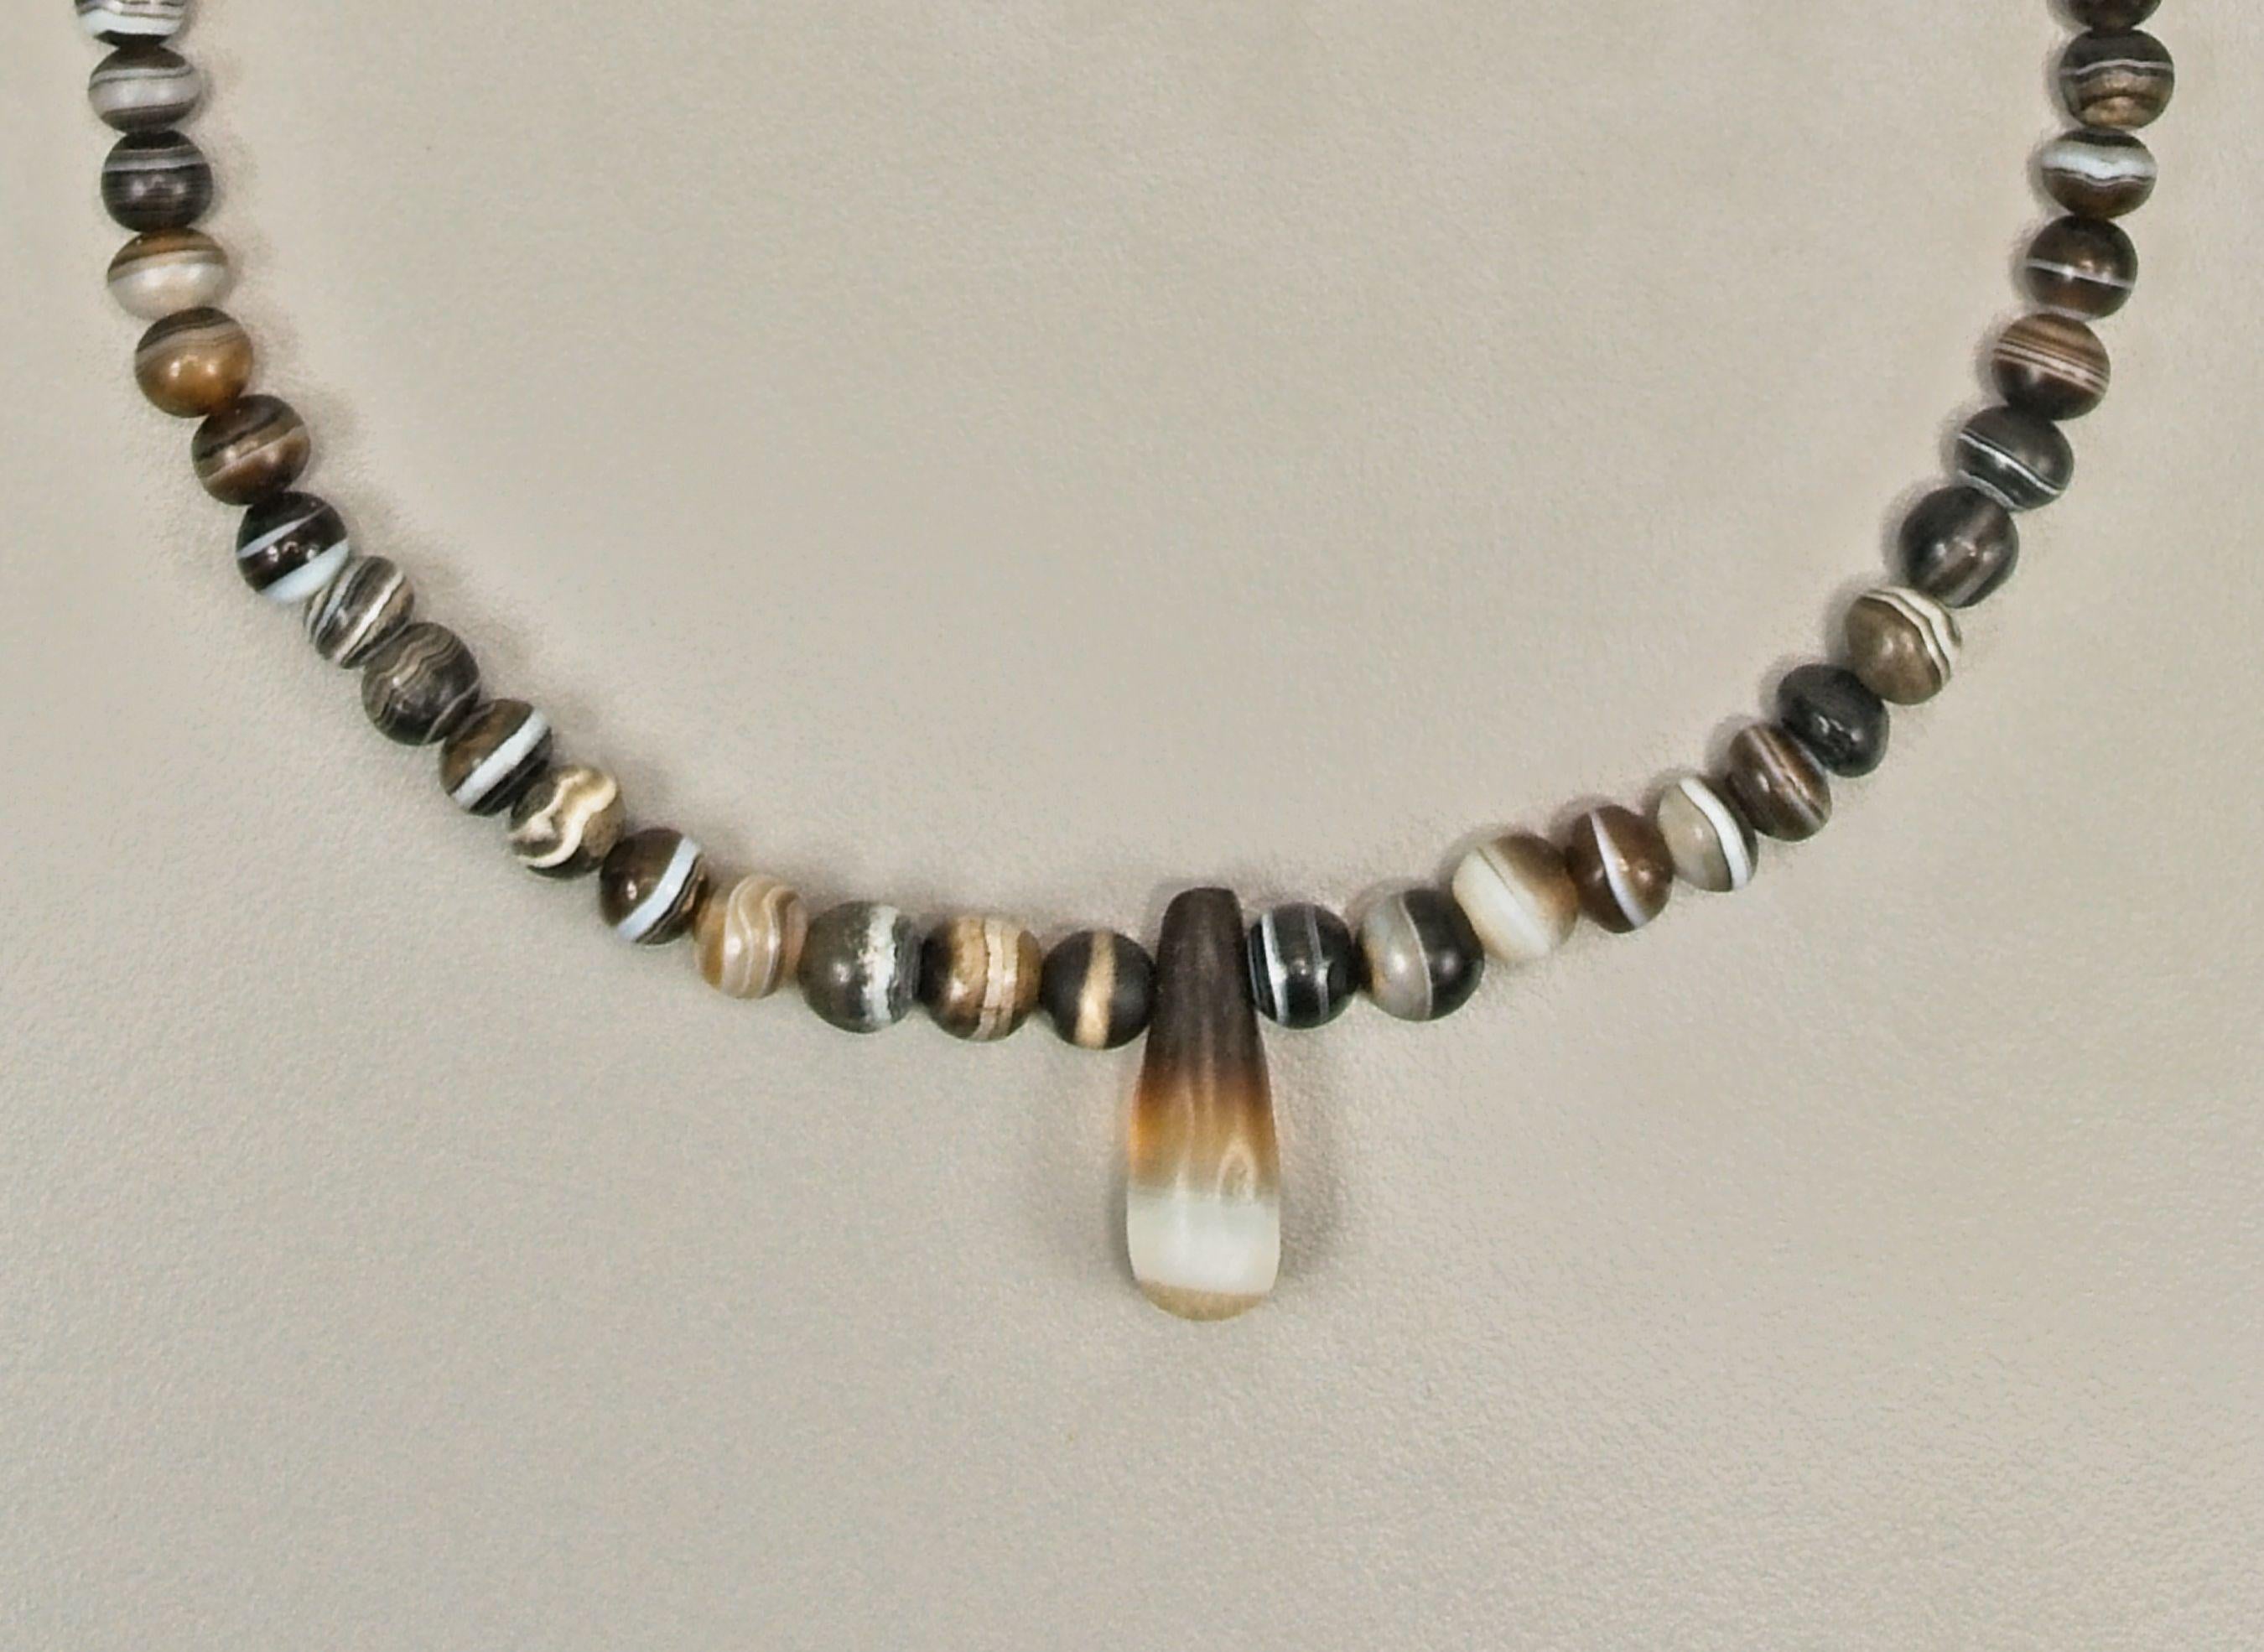 Seventy-four round agate beads with a teardrop shaped pendant bead at the center. The pendant is 2.82 cm in height, 1 cm in width at the bottom. The drill hole is 4 mm from the top and is 2.3 mm in diameter. The beads graduate in size from the front